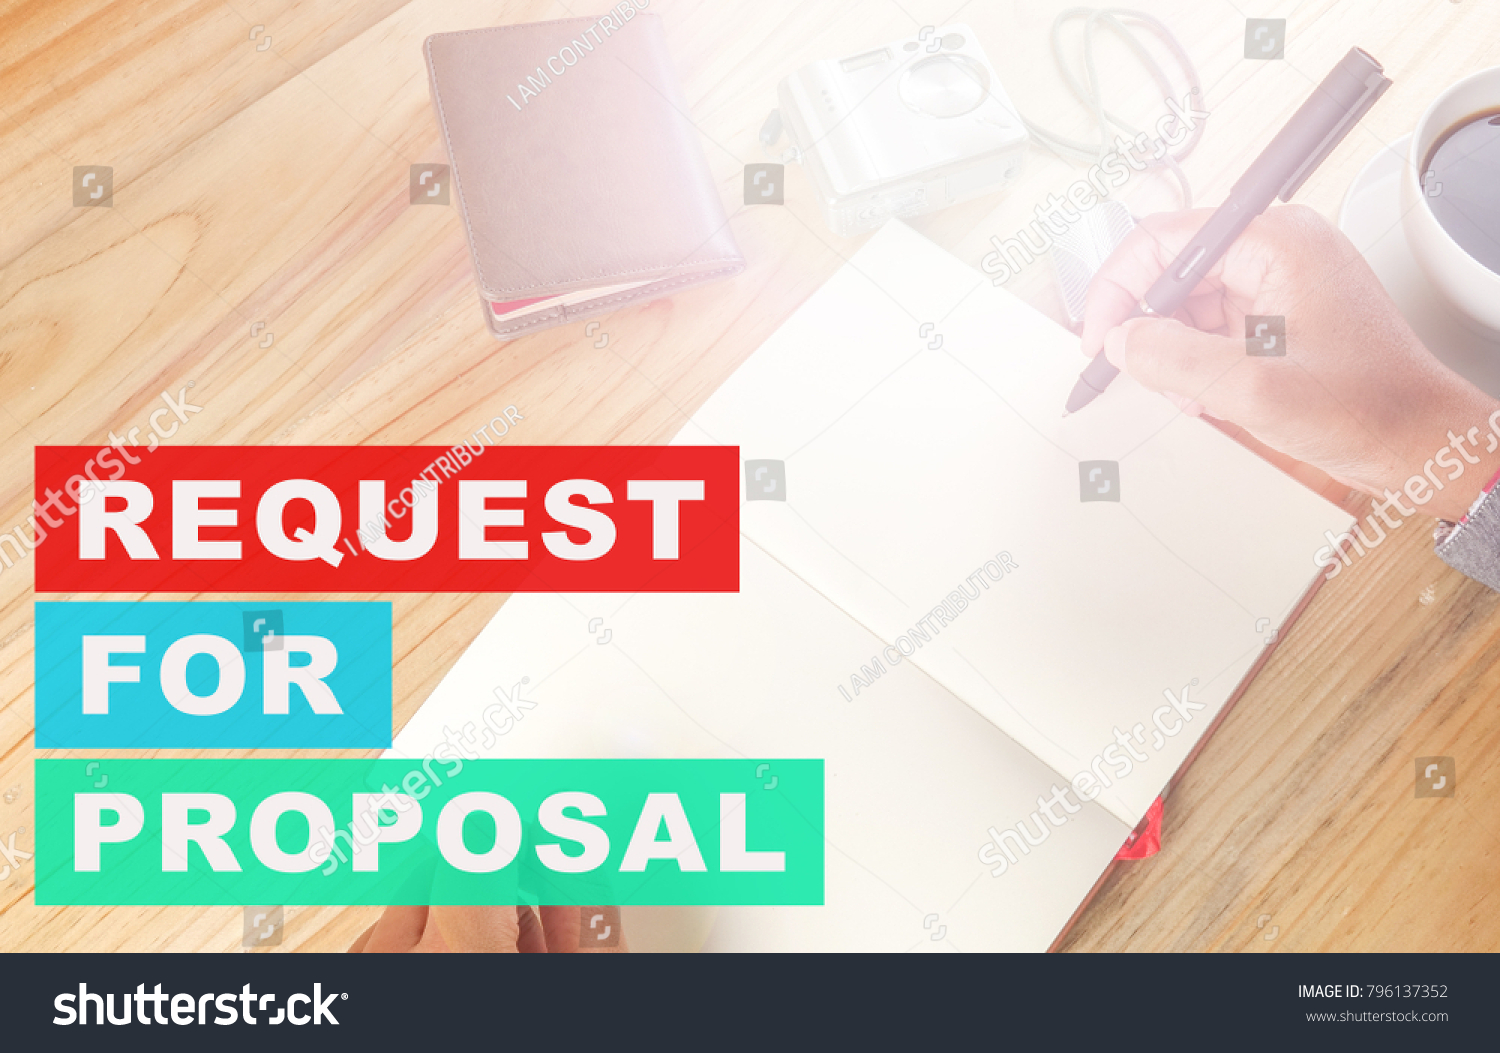 REQUEST FOR PROPOSAL CONCEPT. #796137352